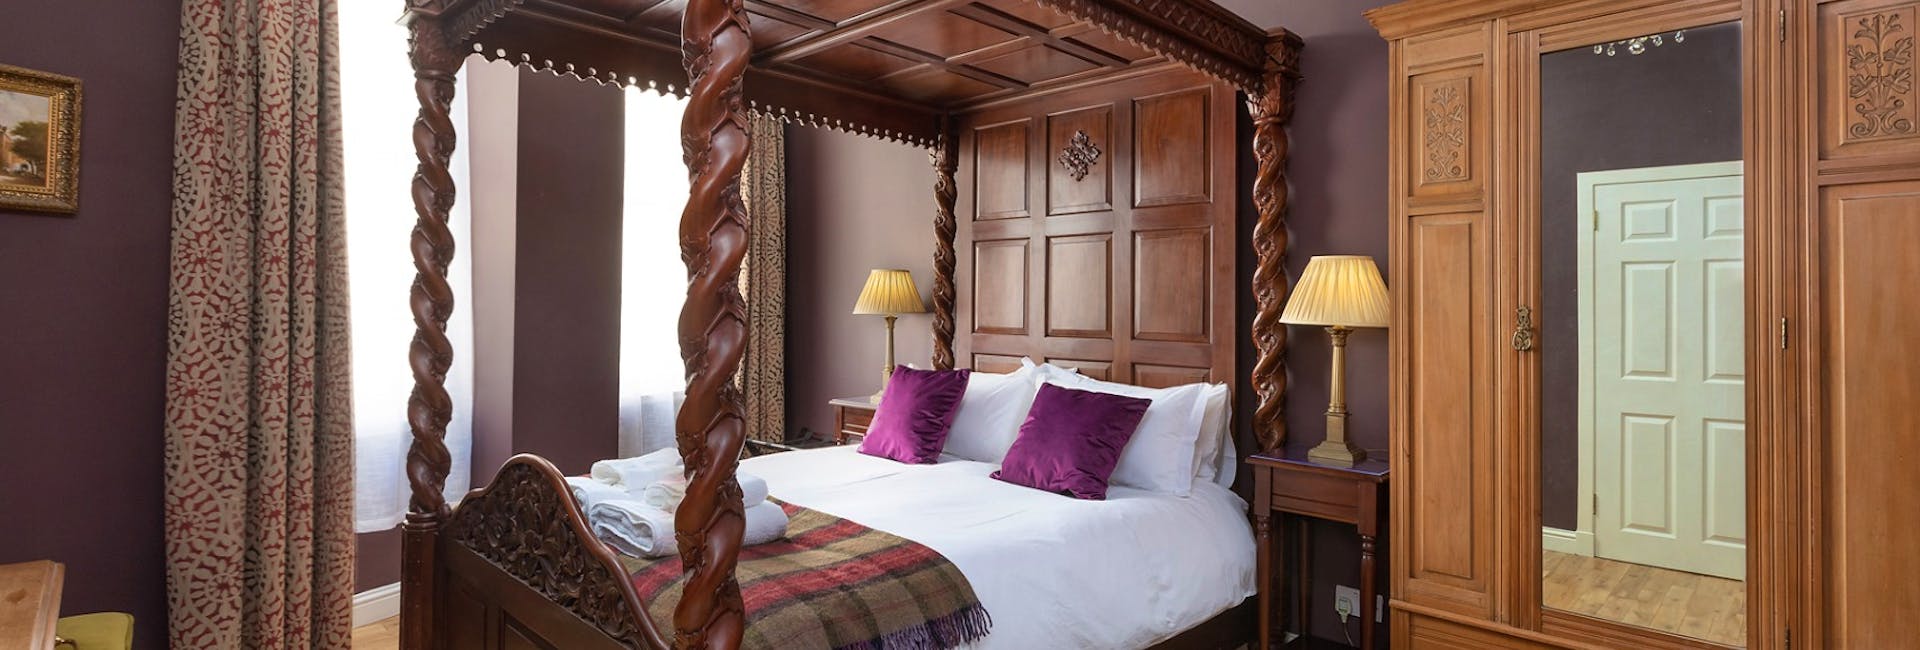 Featured Image for The Lairds Lodging P420 Old Town Edinburgh